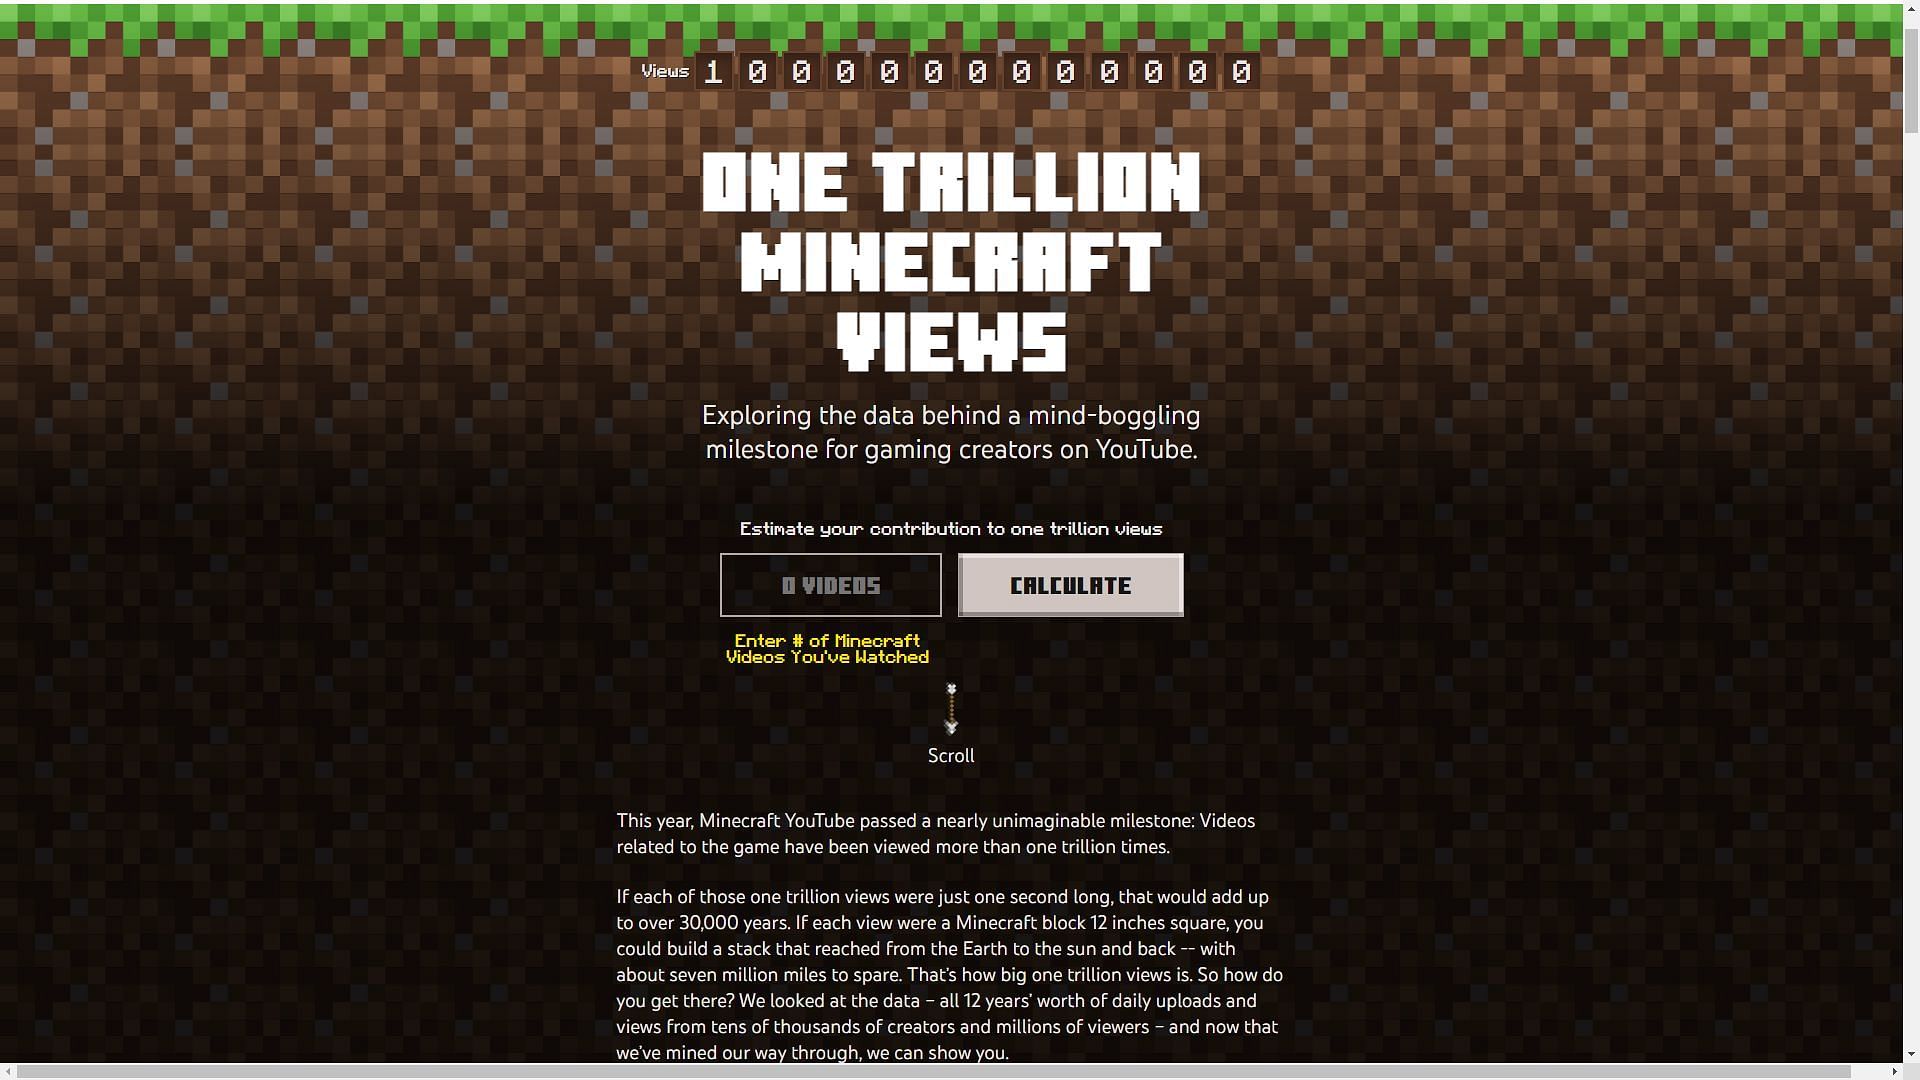 YouTube celebrating the game for crossing one trillion views on their platform (Image via YouTube)